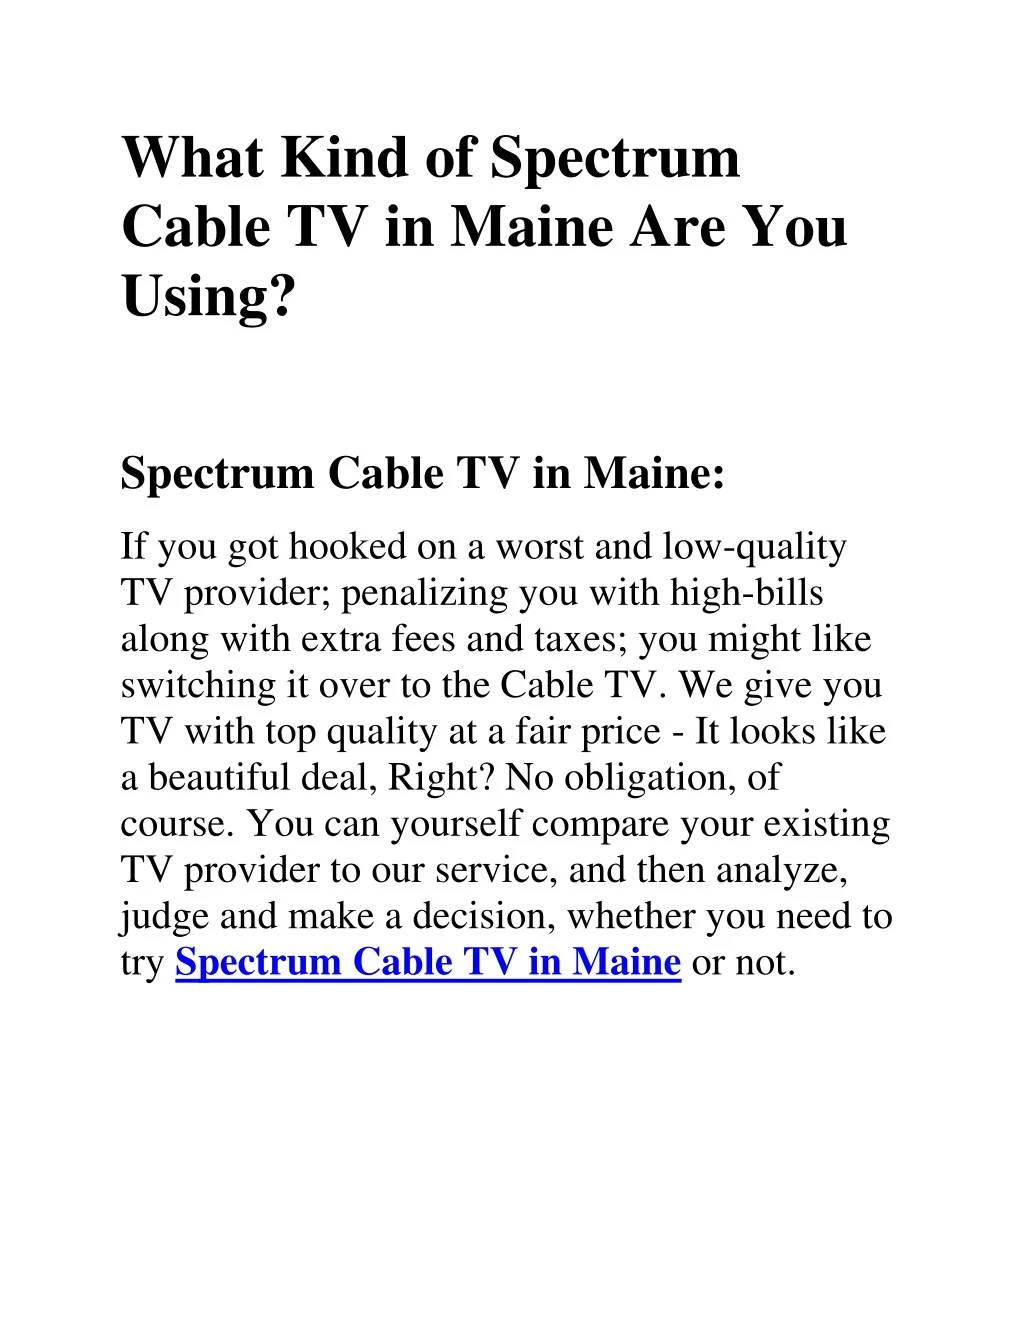 what kind of spectrum cable tv in maine